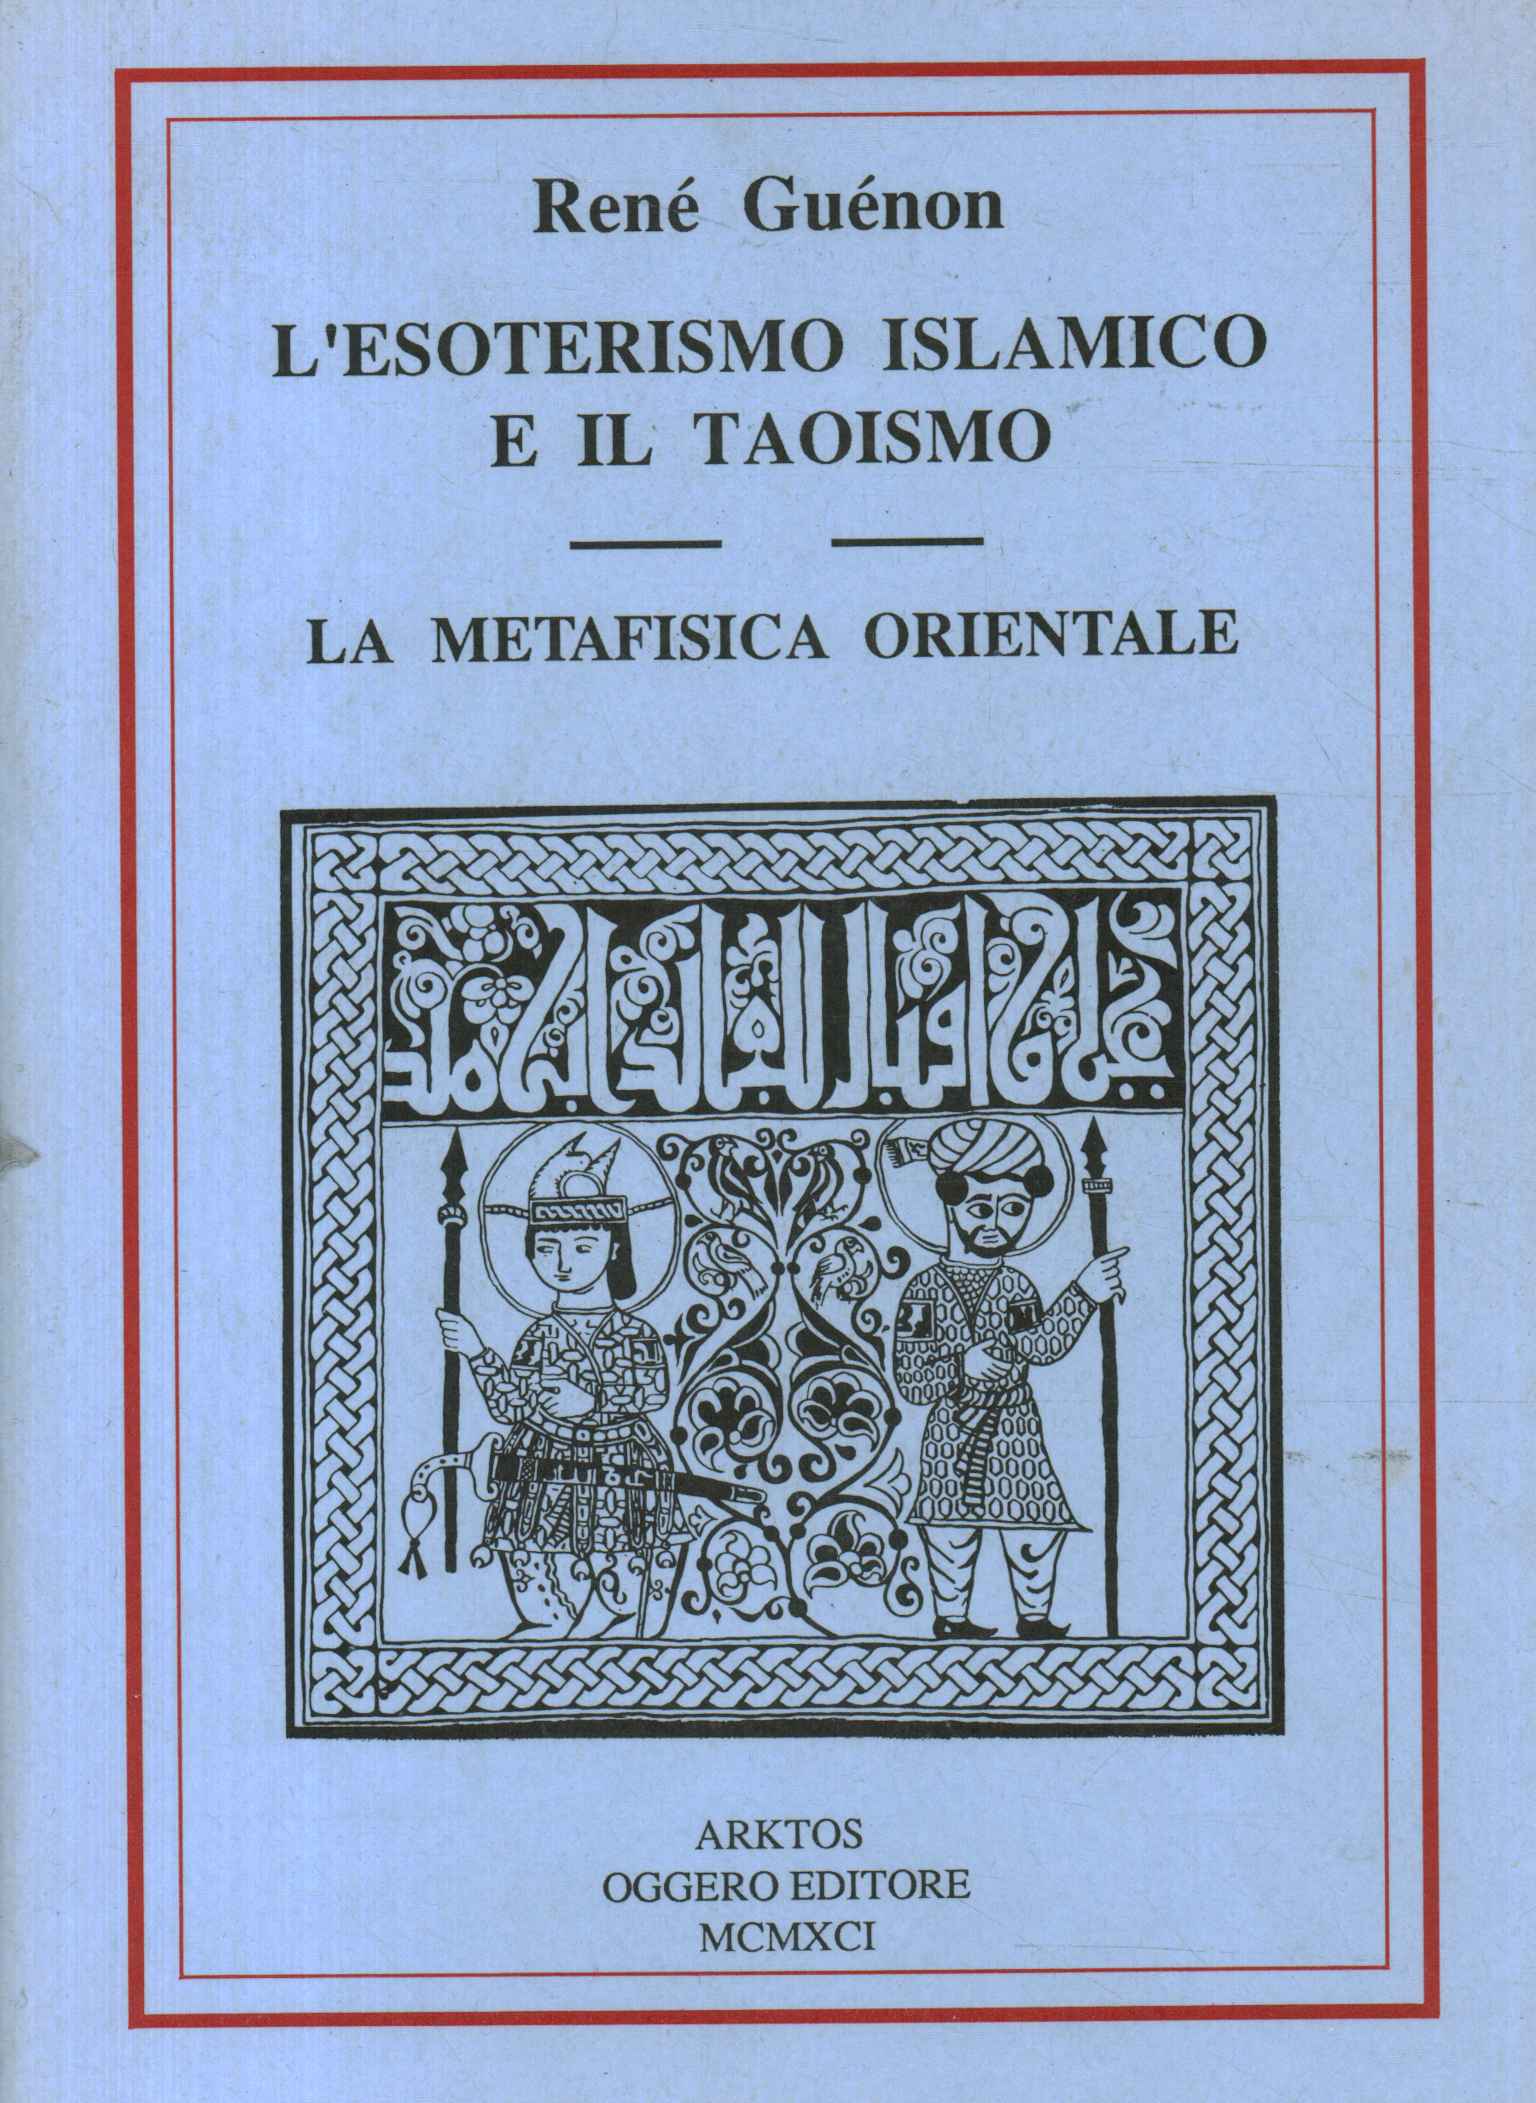 Considerations on Isla Esotericism, Islamic Esotericism and Taoism